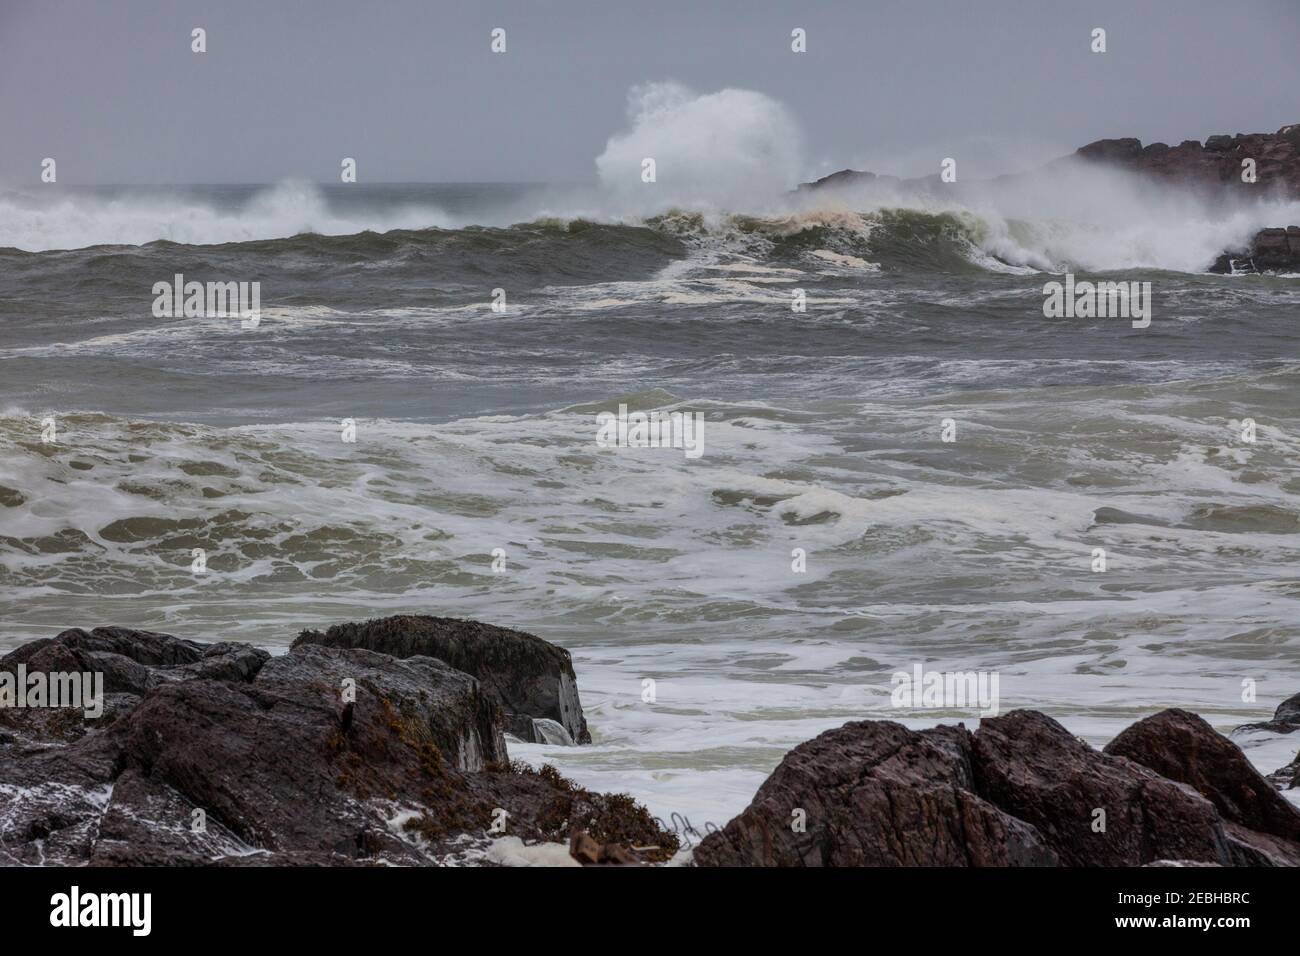 rough ocean in Winter, waves and stormy sky, St. Bride's, Newfoundland, Canada Stock Photo